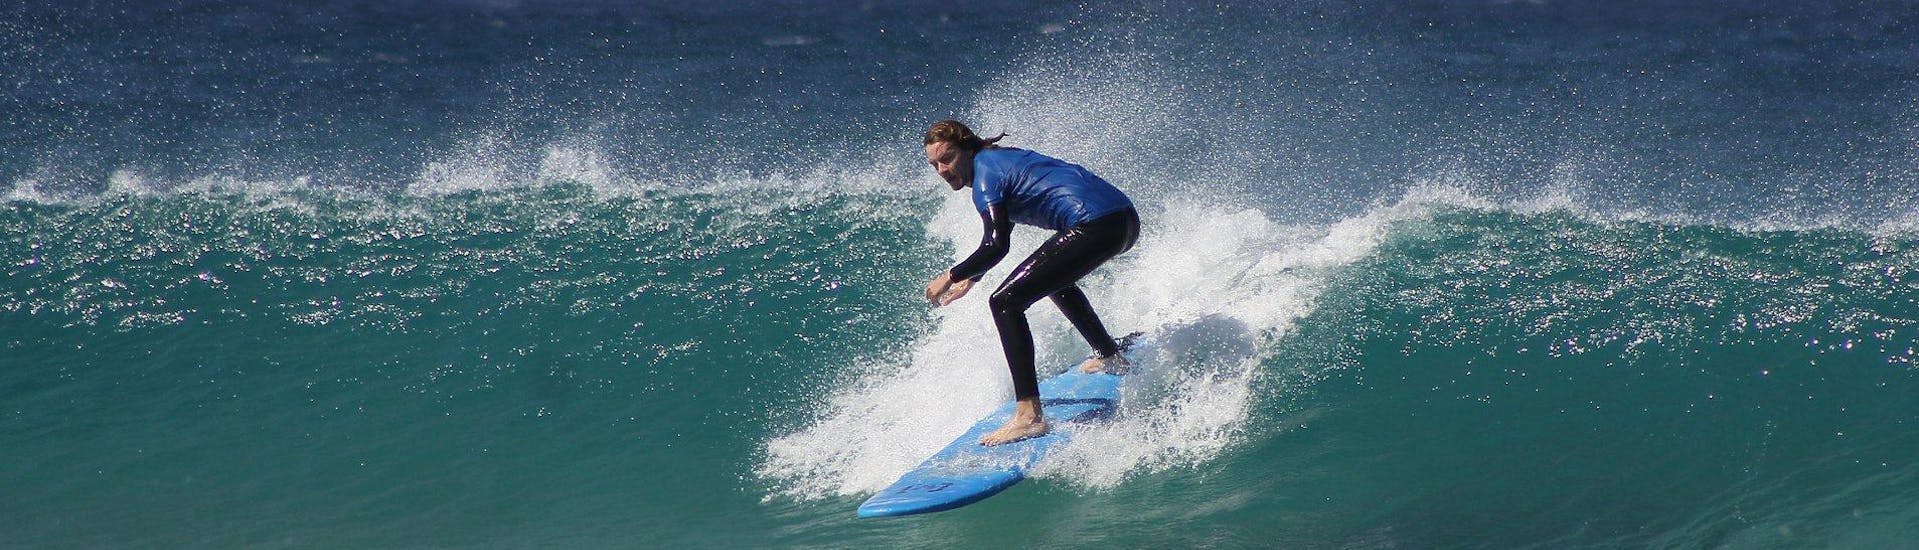 Private Surfing Lesson for Kids &amp; Adults - All Levels with Fuerteventura Surf School - Hero image